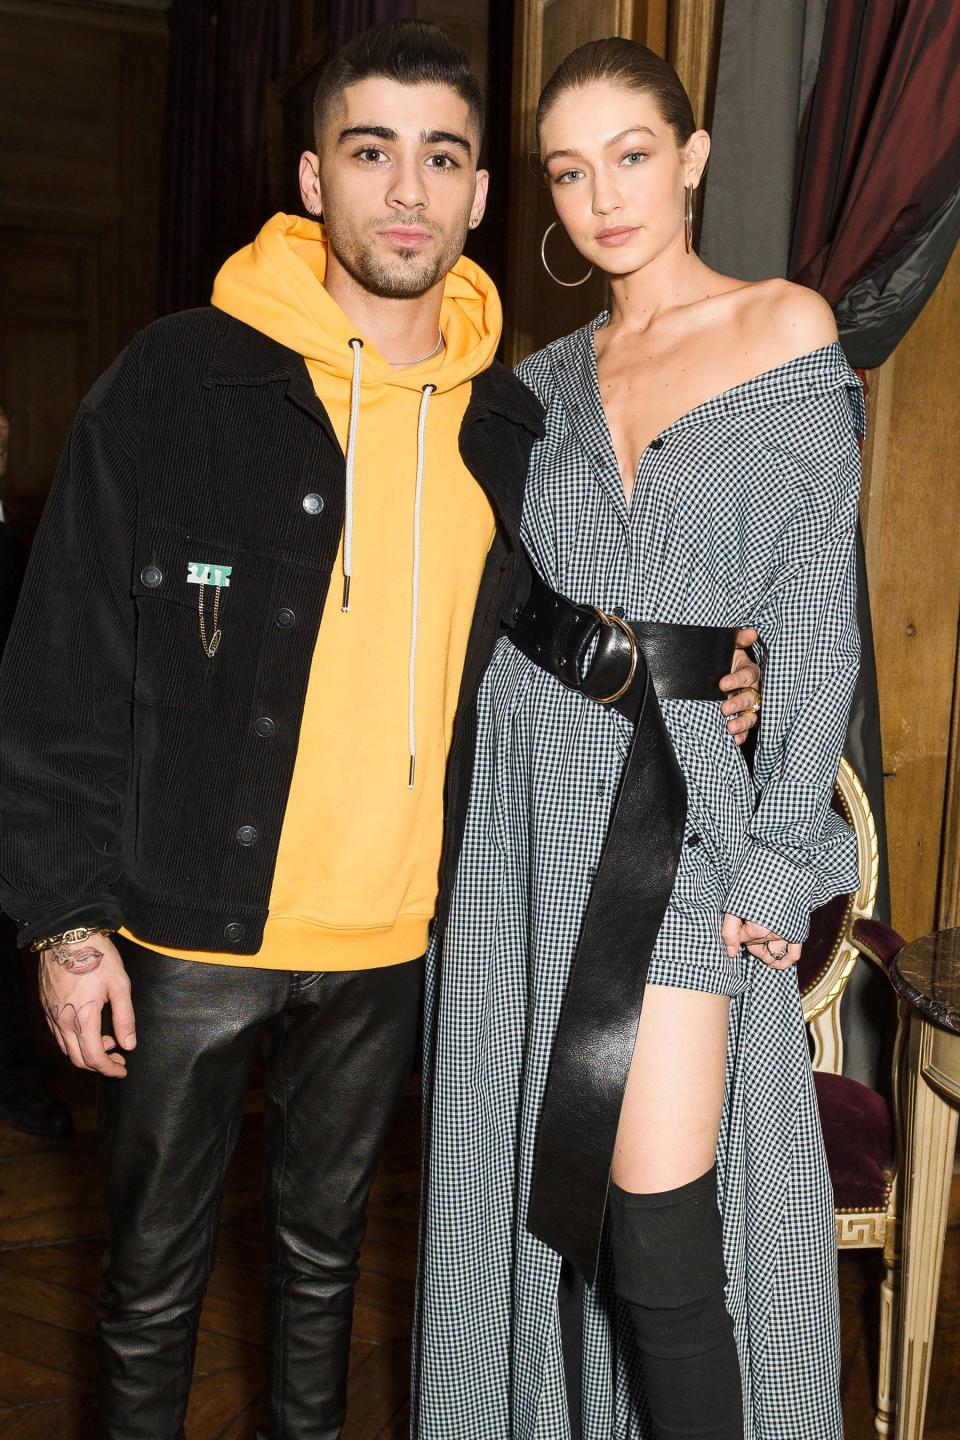 Just months after revealing their rekindled romance on social media following a brief split in March 2018,<a href="https://people.com/tag/zayn-malik" rel="nofollow noopener" target="_blank" data-ylk="slk:Malik;elm:context_link;itc:0;sec:content-canvas" class="link "> Malik</a> and<a href="https://people.com/tag/gigi-hadid" rel="nofollow noopener" target="_blank" data-ylk="slk:Hadid;elm:context_link;itc:0;sec:content-canvas" class="link "> Hadid</a> seemingly <a href="https://people.com/music/gigi-hadid-zayn-malik-split-again-after-rekindling-romance/" rel="nofollow noopener" target="_blank" data-ylk="slk:called it quits;elm:context_link;itc:0;sec:content-canvas" class="link ">called it quits</a> for the second time. <a href="https://www.usmagazine.com/celebrity-news/news/gigi-hadid-and-zayn-malik-split-again-theyre-done/" rel="nofollow noopener" target="_blank" data-ylk="slk:Multiple outlets report;elm:context_link;itc:0;sec:content-canvas" class="link ">Multiple outlets report</a> that the two<a href="https://www.etonline.com/inside-gigi-hadid-and-zayn-maliks-split-for-the-second-time-116524" rel="nofollow noopener" target="_blank" data-ylk="slk:ended things again around the holidays.;elm:context_link;itc:0;sec:content-canvas" class="link "> ended things again around the holidays.</a> The high-profile couple first started dating in November 2015, but stirred up the first inklings of their split when Malik didn’t sit in the audience of the <a href="https://people.com/tag/victorias-secret-fashion-show/" rel="nofollow noopener" target="_blank" data-ylk="slk:Victoria’s Secret Fashion Show;elm:context_link;itc:0;sec:content-canvas" class="link ">Victoria’s Secret Fashion Show</a> in November to cheer on Hadid as he has done in previous years. Malik also stopped following Hadid on Instagram.